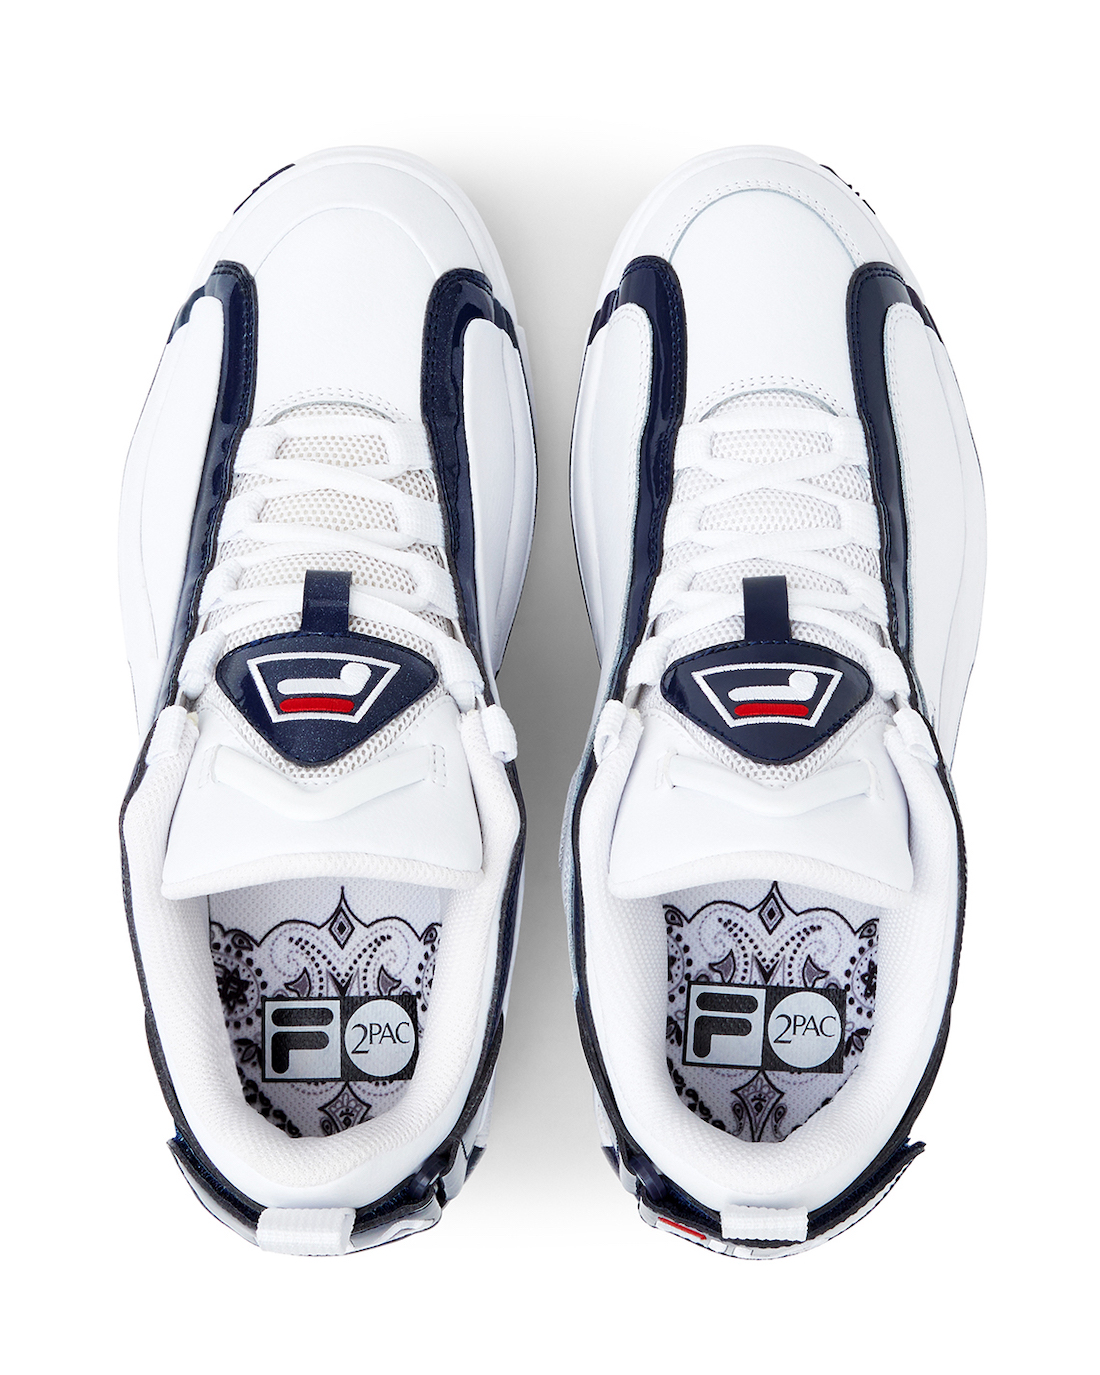 2Pac FILA Grant Hill 2 Low Reissue Release Date